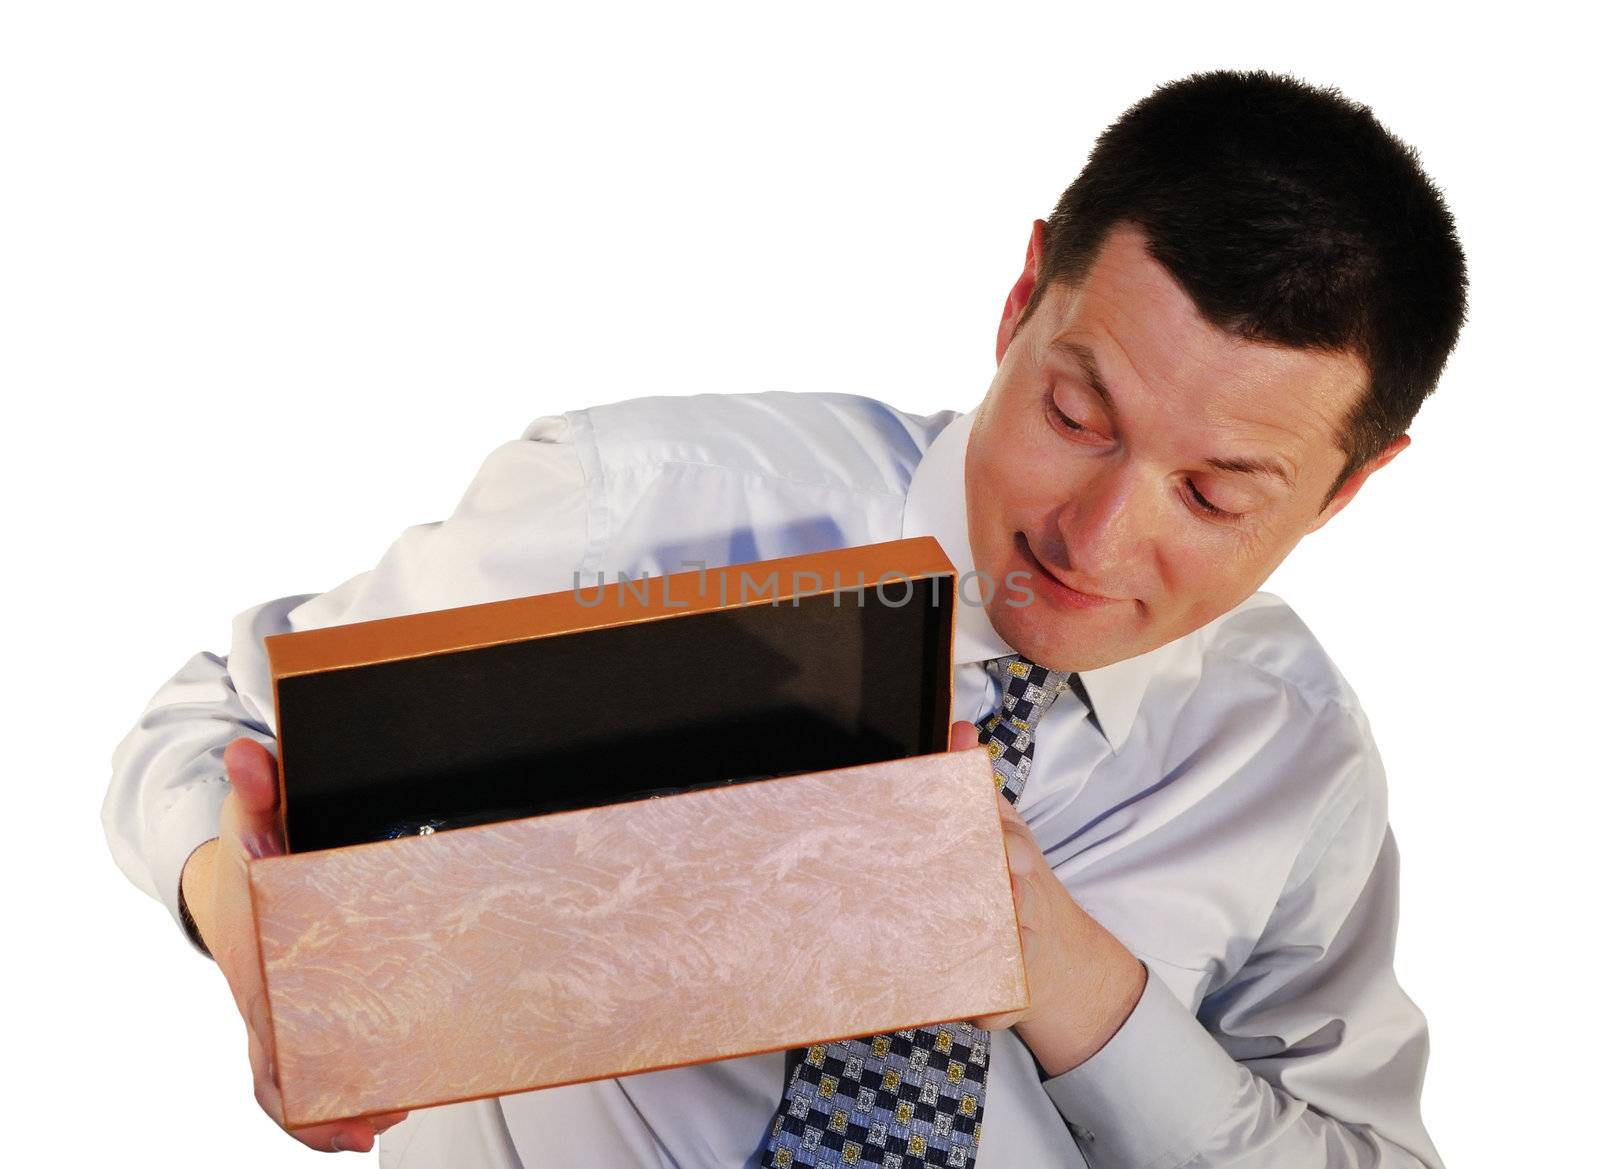 man stretches out a hand for a simple box